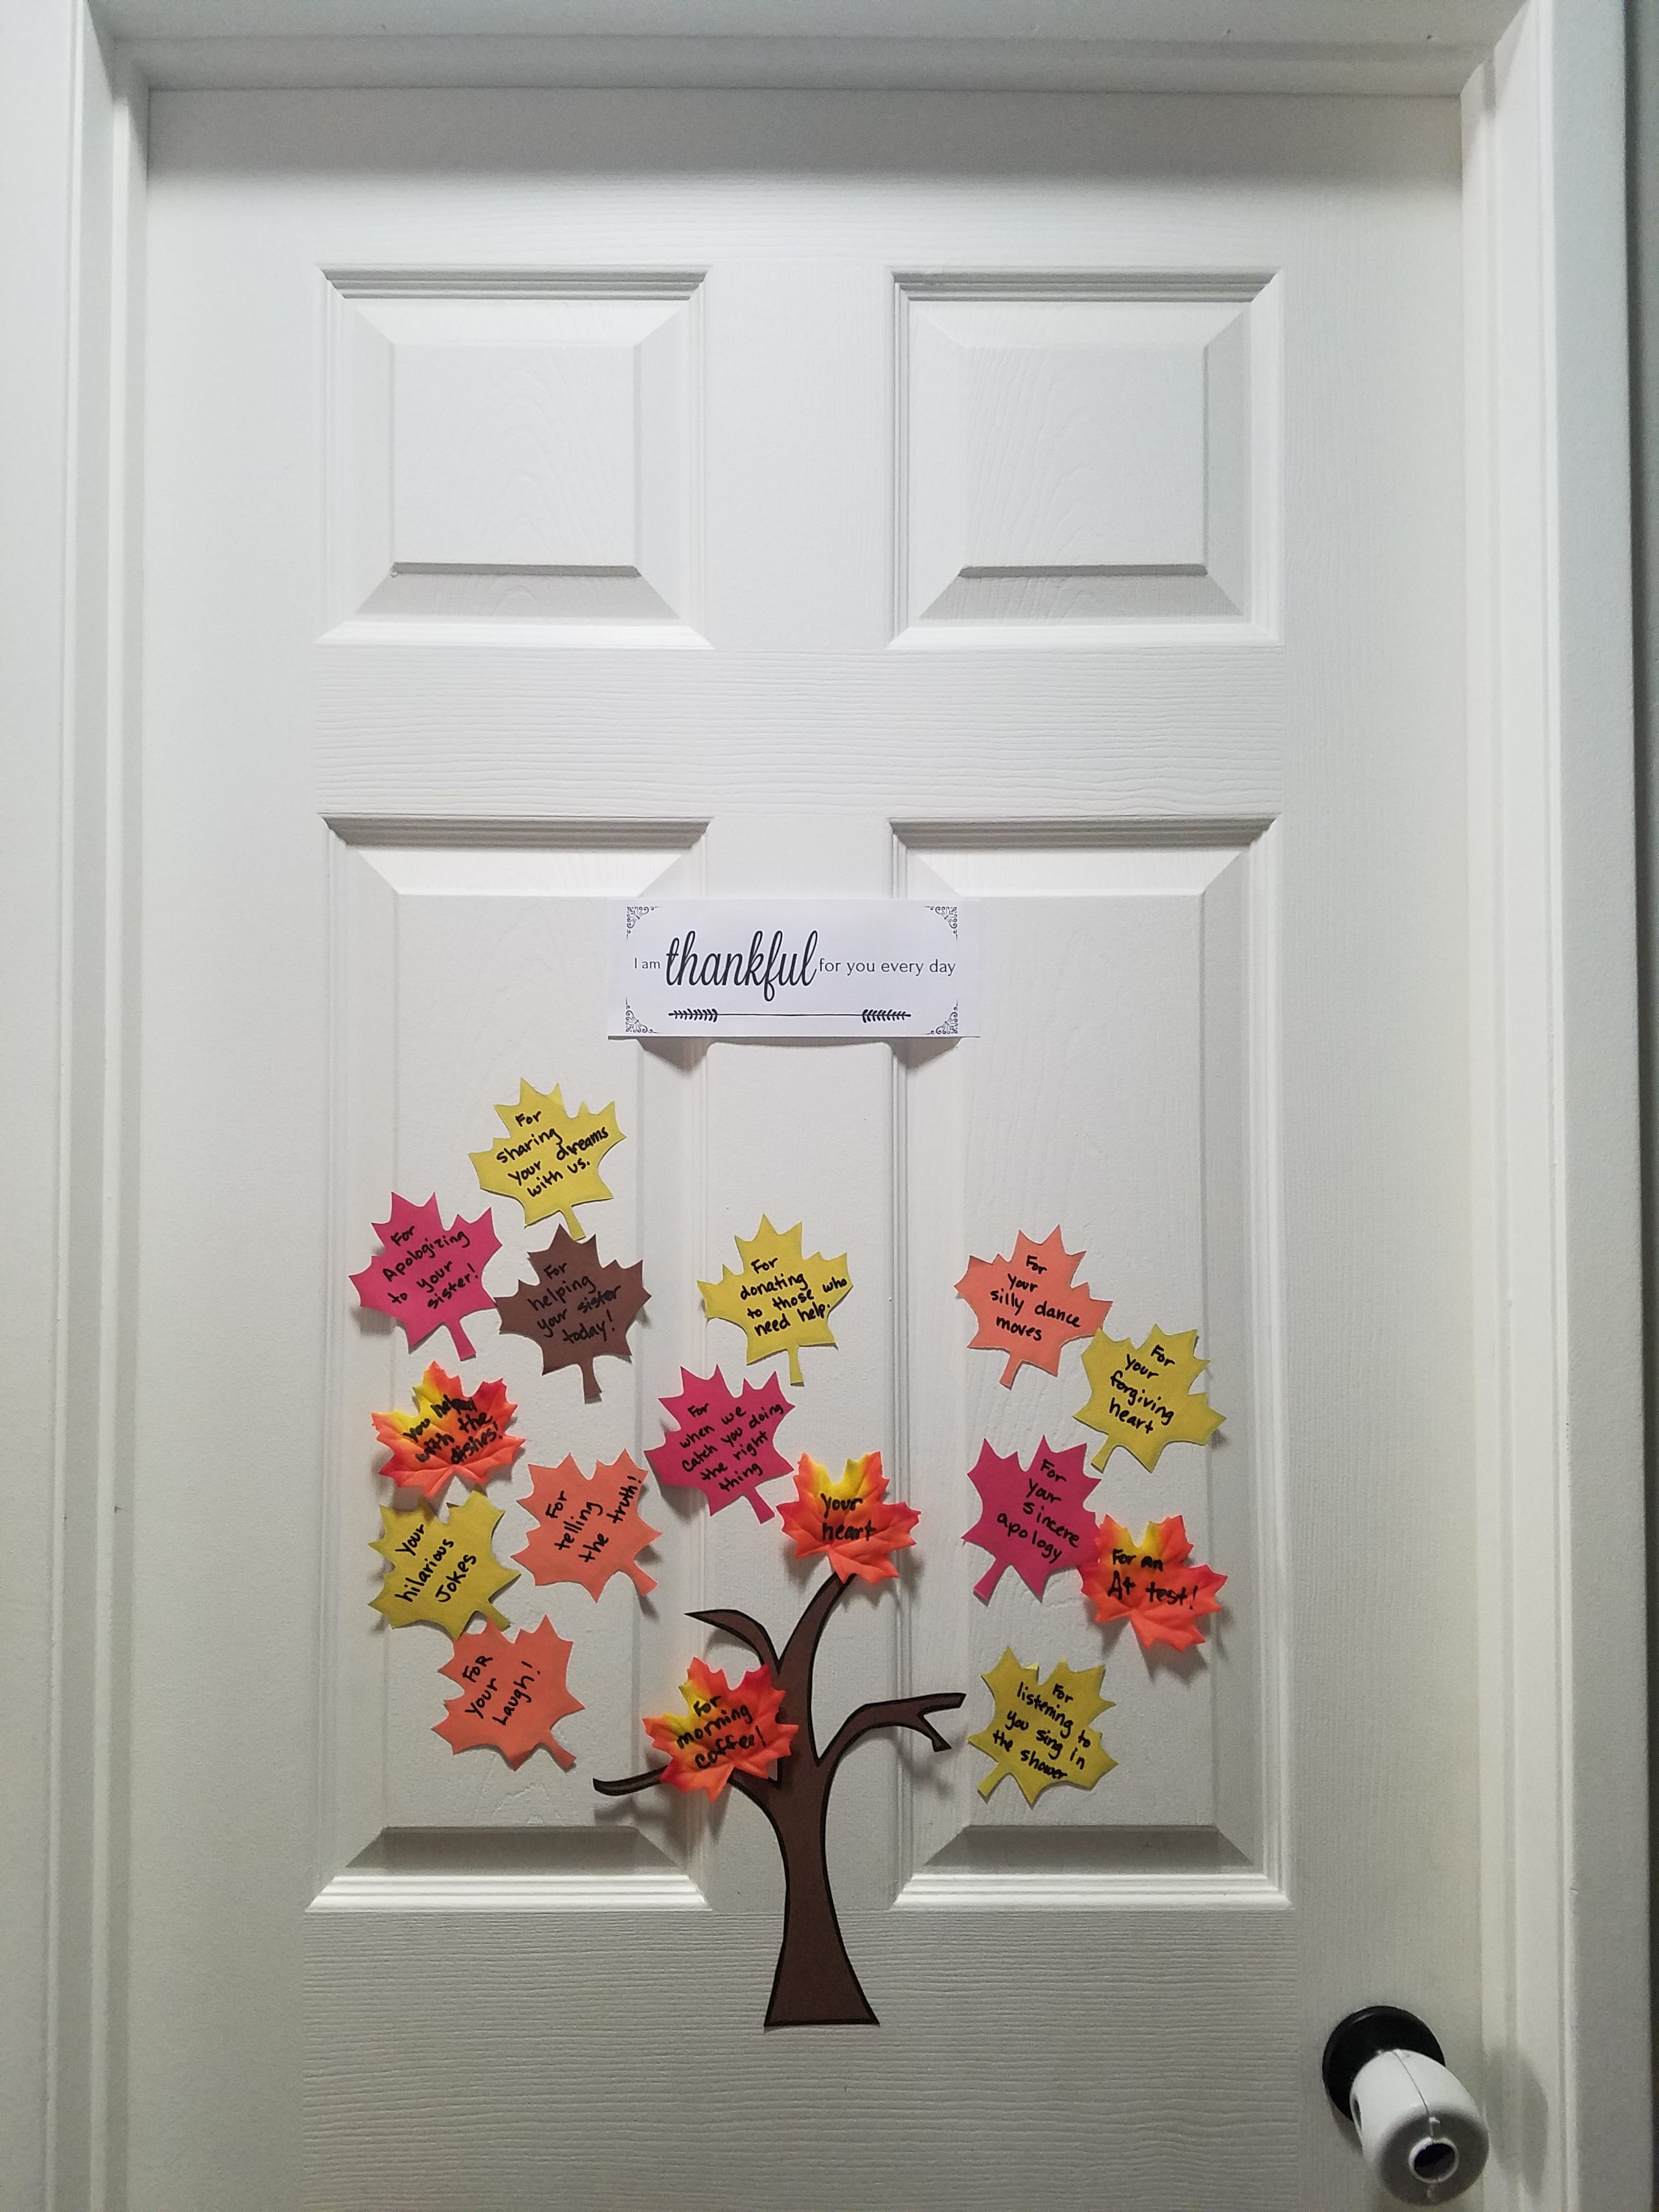 Thankful trees for kids